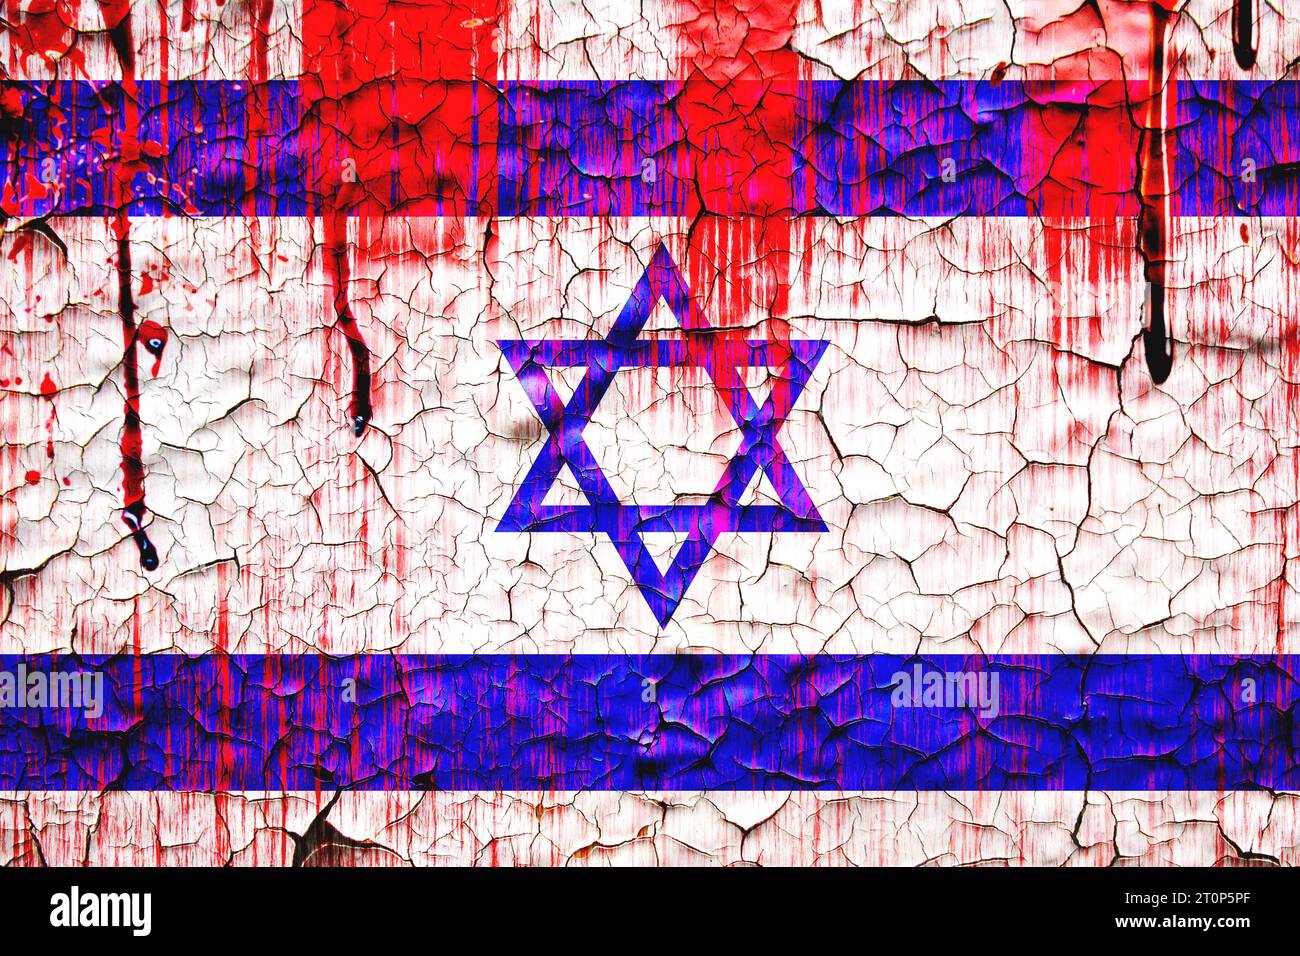 Israel flag painted over cracked concrete wall.blood effect on Israel flag. hamas israel conflict concept. Stock Photo